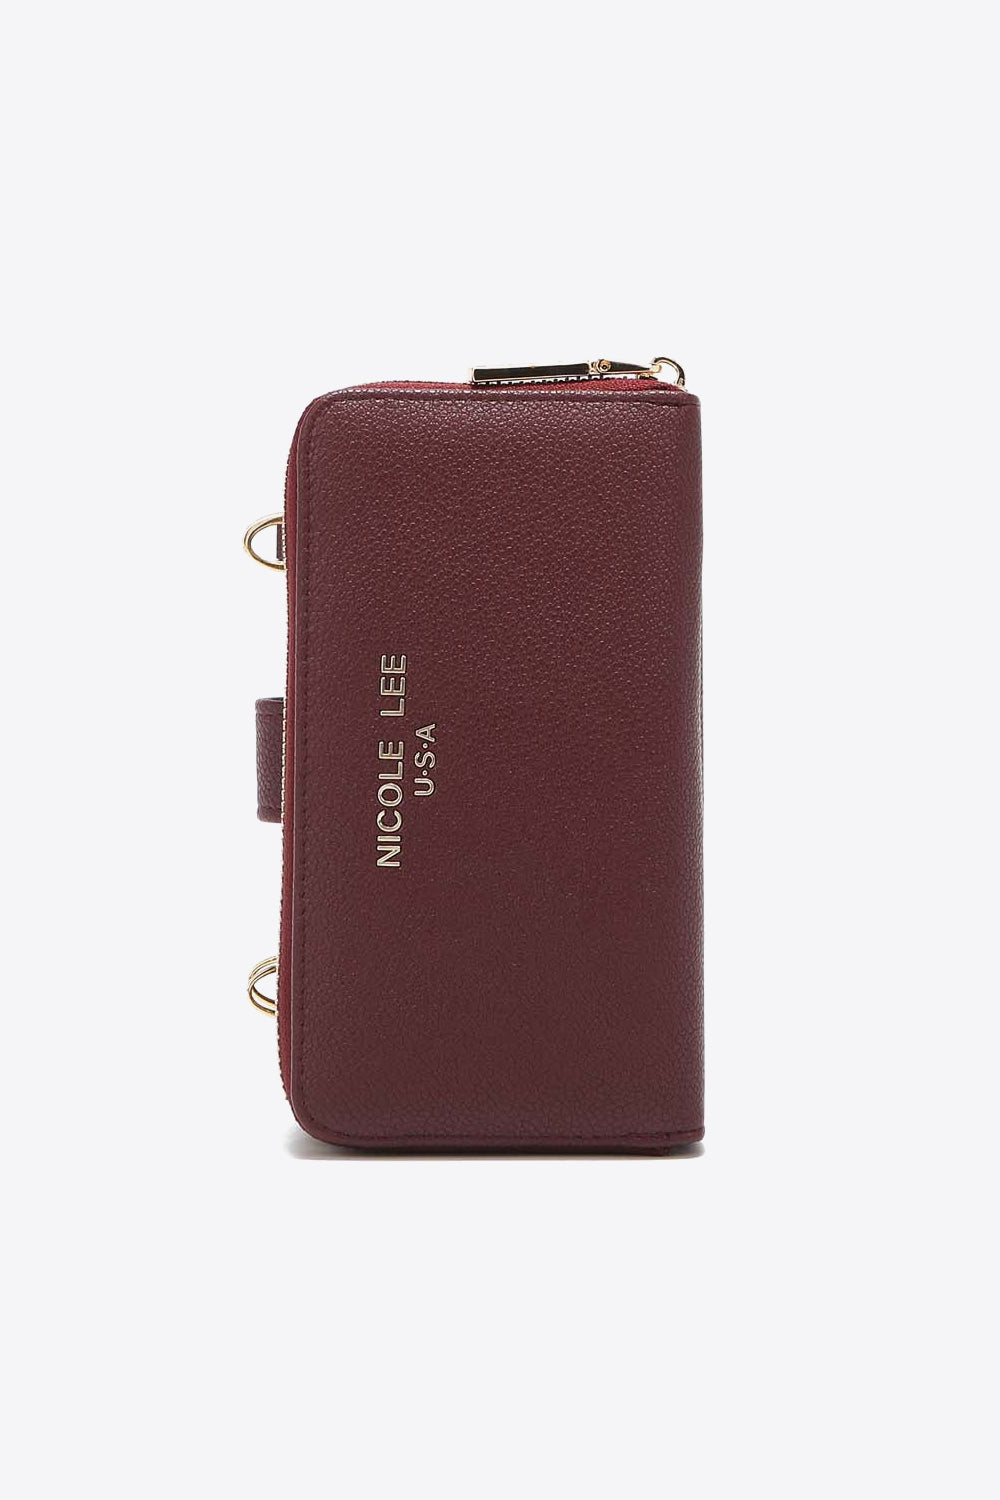 Nicole Lee USA Phone Case Wallet Vegan Leather Crossbody Cell Phone Case Wallet Various Colors, Black, Red, Mustard, Sage, Gray, Wine, Chestnut